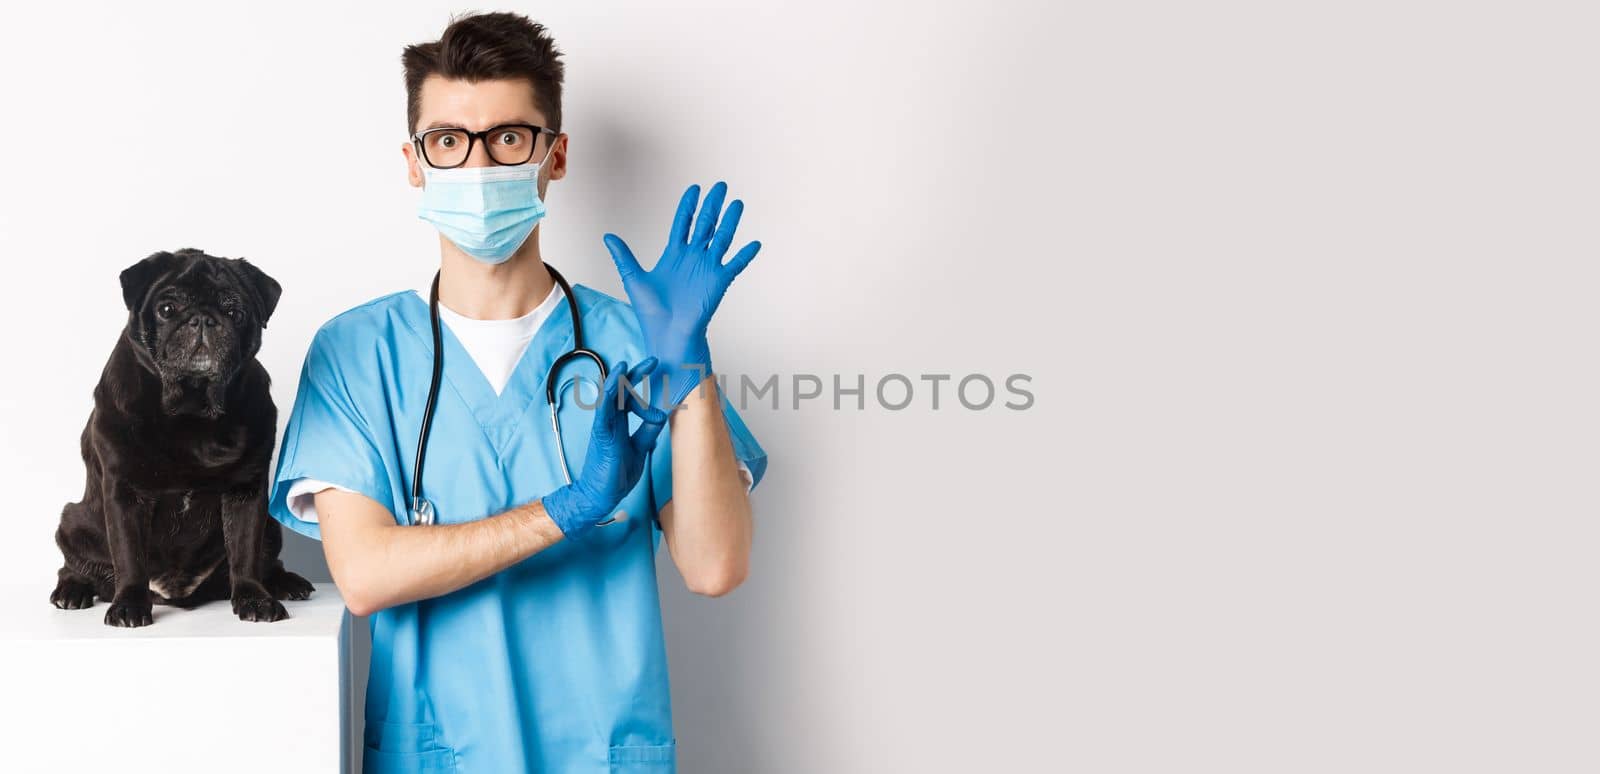 Handsome vet doctor in veterinarian clinic put on gloves and medical mask, examining cute little dog pug, white background.